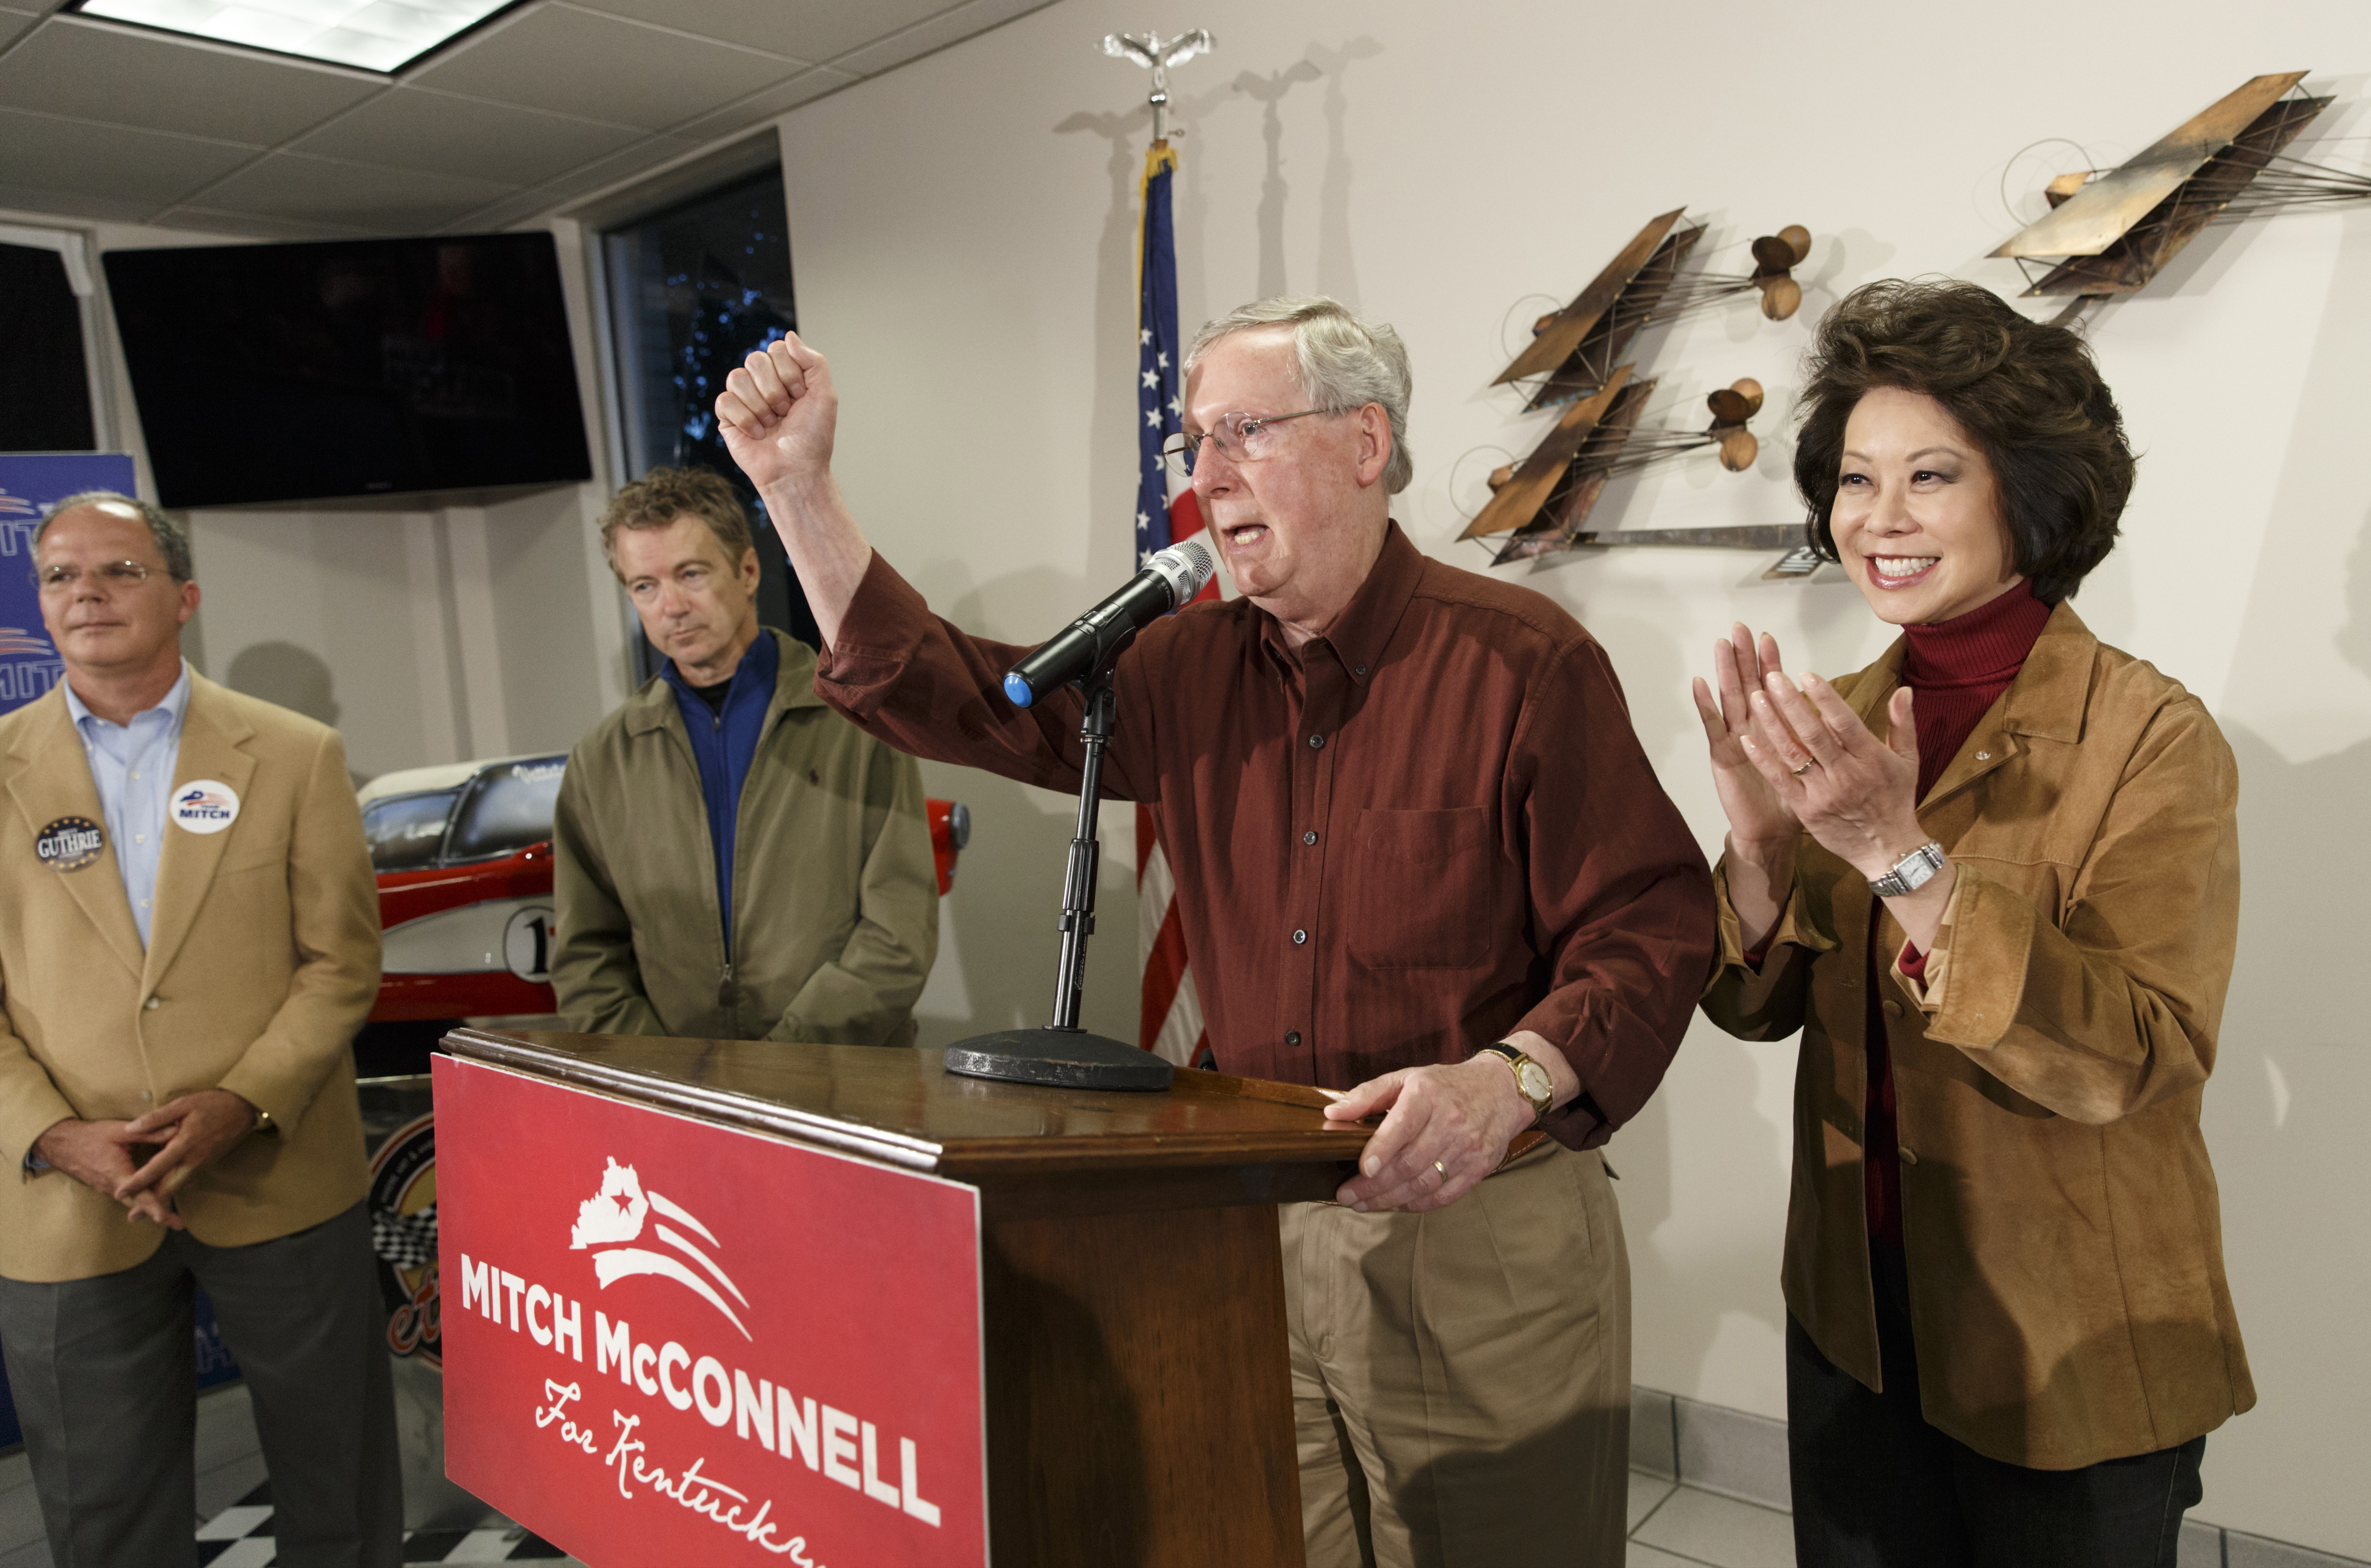 On his final campaign stop, Senate Minority Leader Mitch McConnell, R-Ky., gets a campaign assist from his wife, right, former Labor Secretary Elaine Chao, Sen. Rand Paul, R-Ky., second from left, and Rep. Brett Guthrie, R-Ky., far left, as they arrive at the Warren County Regional Airport in Sen. Paul's hometown, Bowling Green, Ky., Monday, Nov. 3, 2014. McConnell, a 30-year incumbent, would ascend to majority leader if he holds his seat and Republicans take control of the Senate in Tuesday's midterm election.   